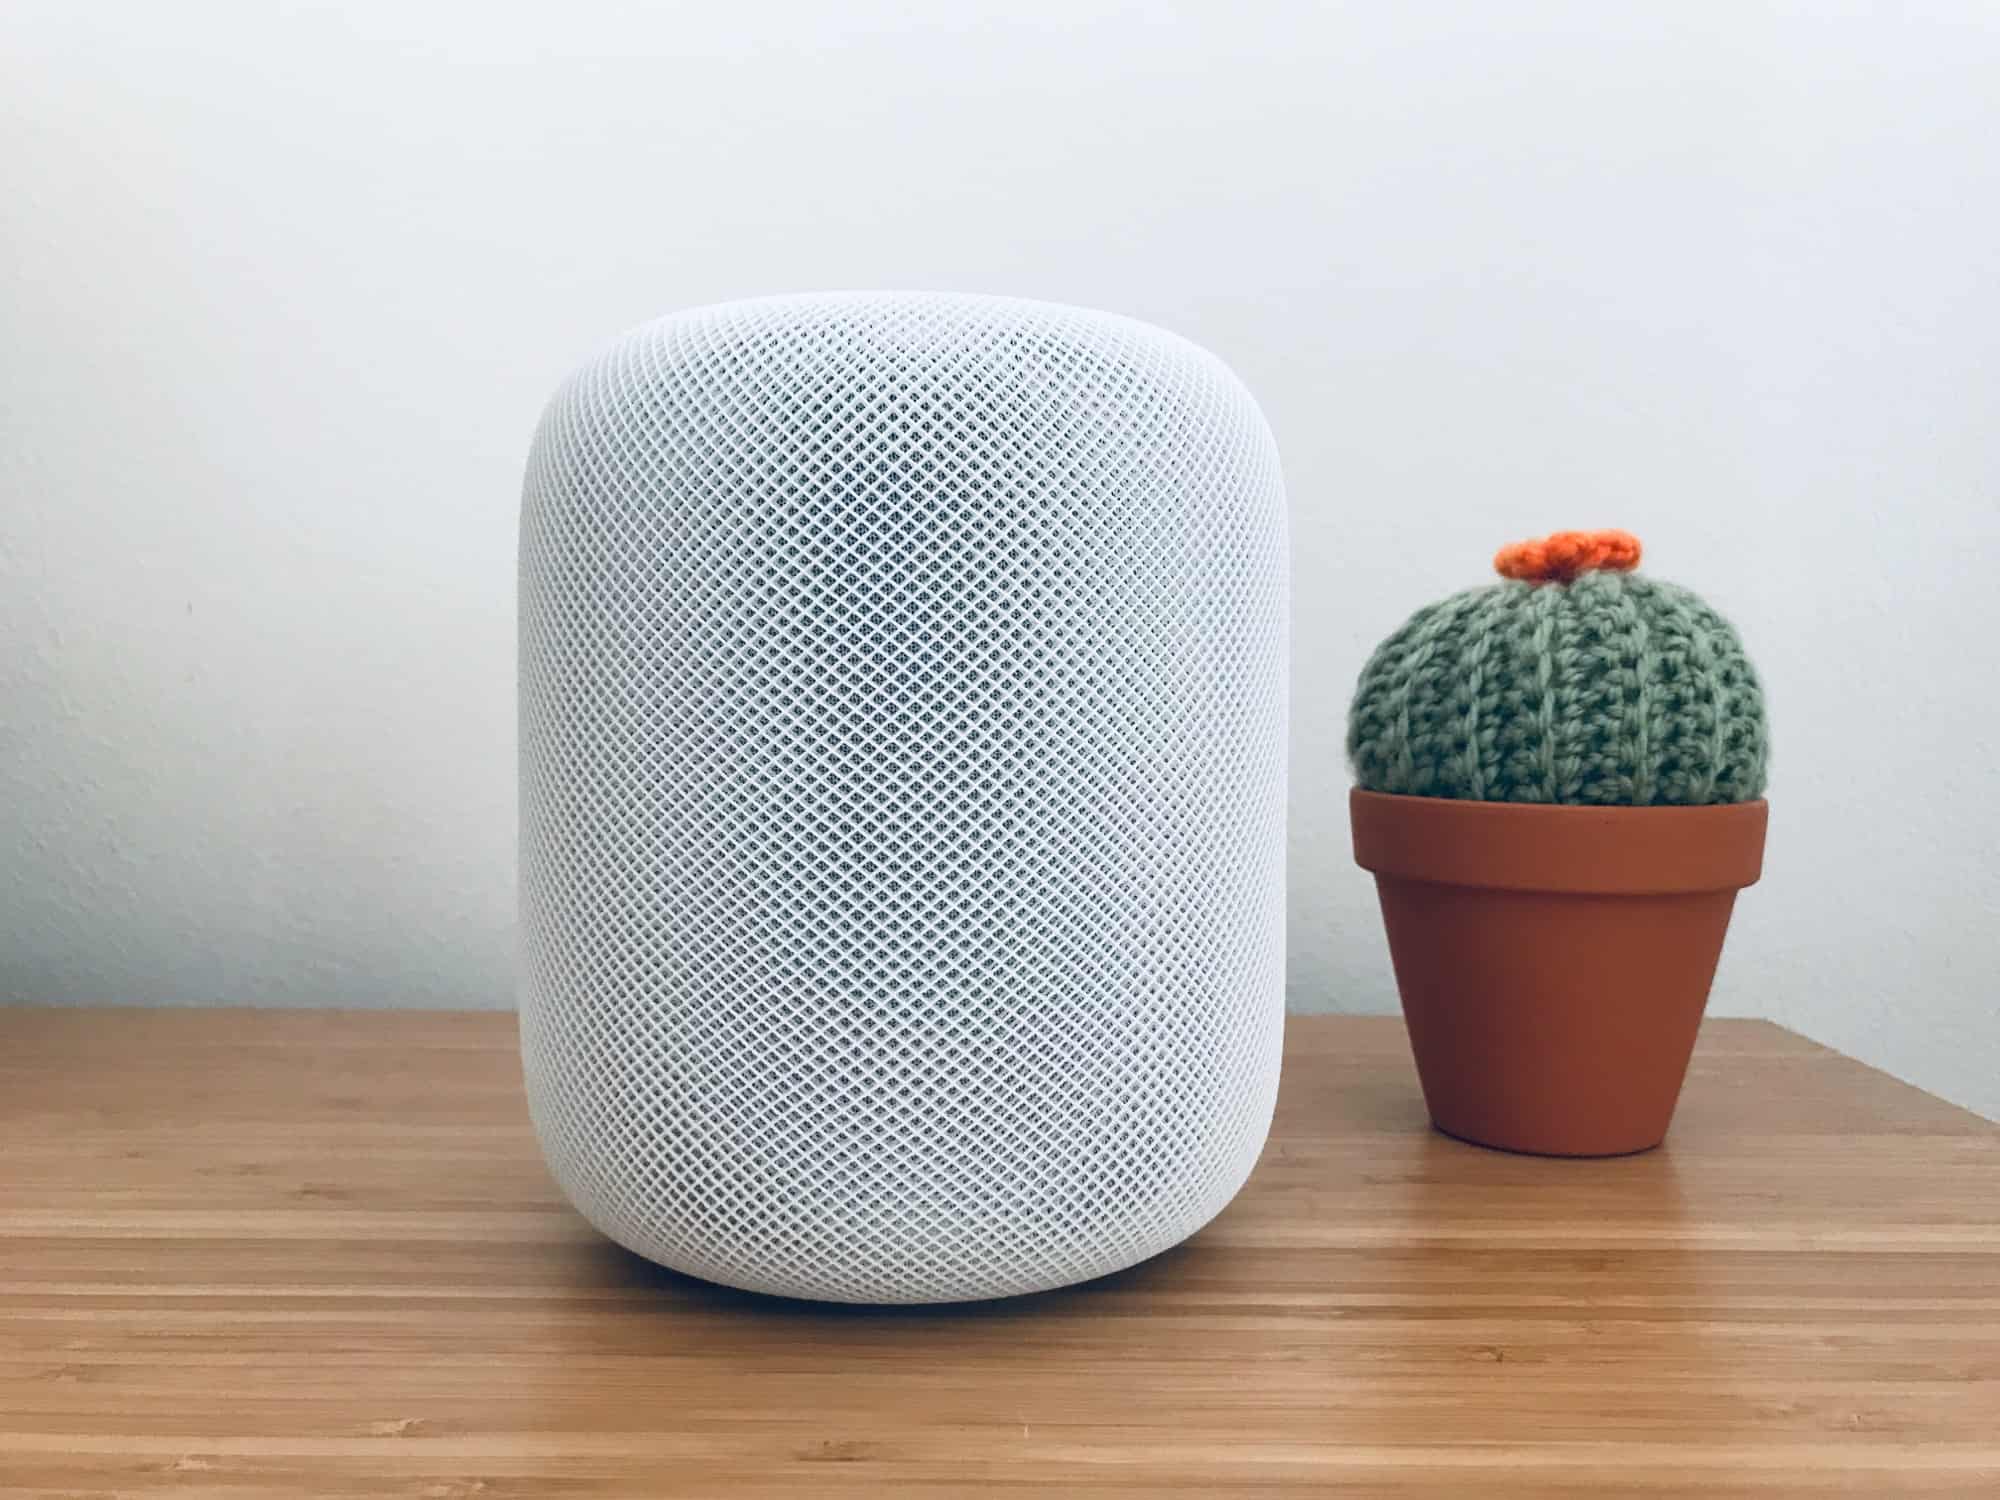 Apple discontinues full-size HomePod smart speaker | Cult of Mac